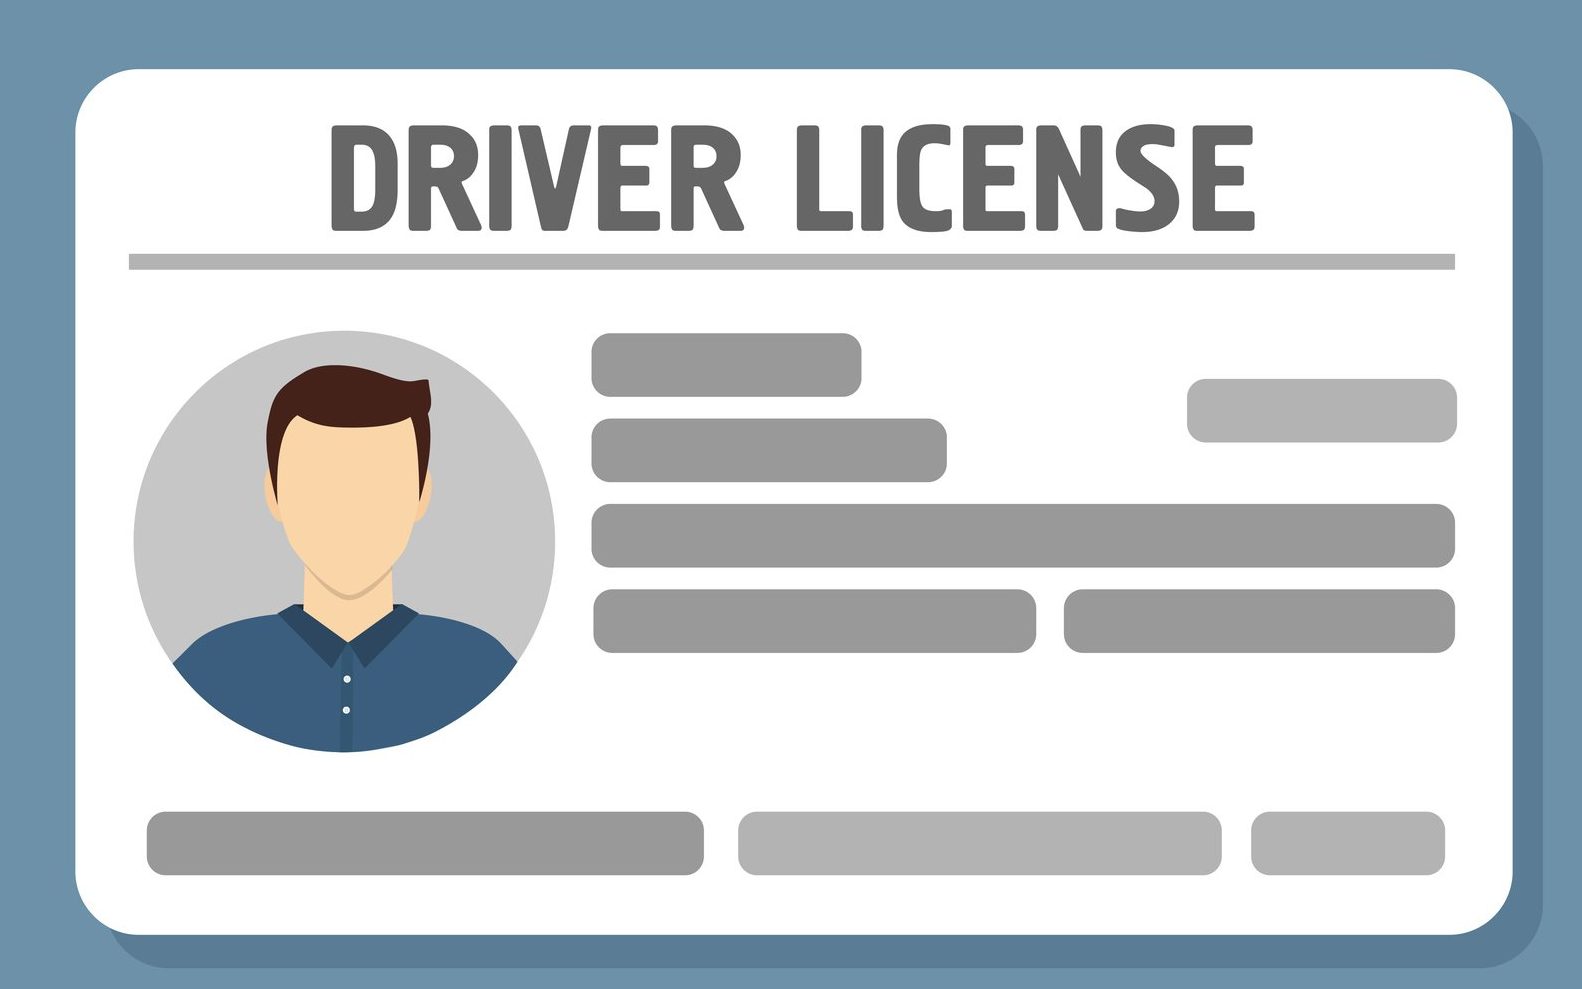 How To Change Address On License New Jersey